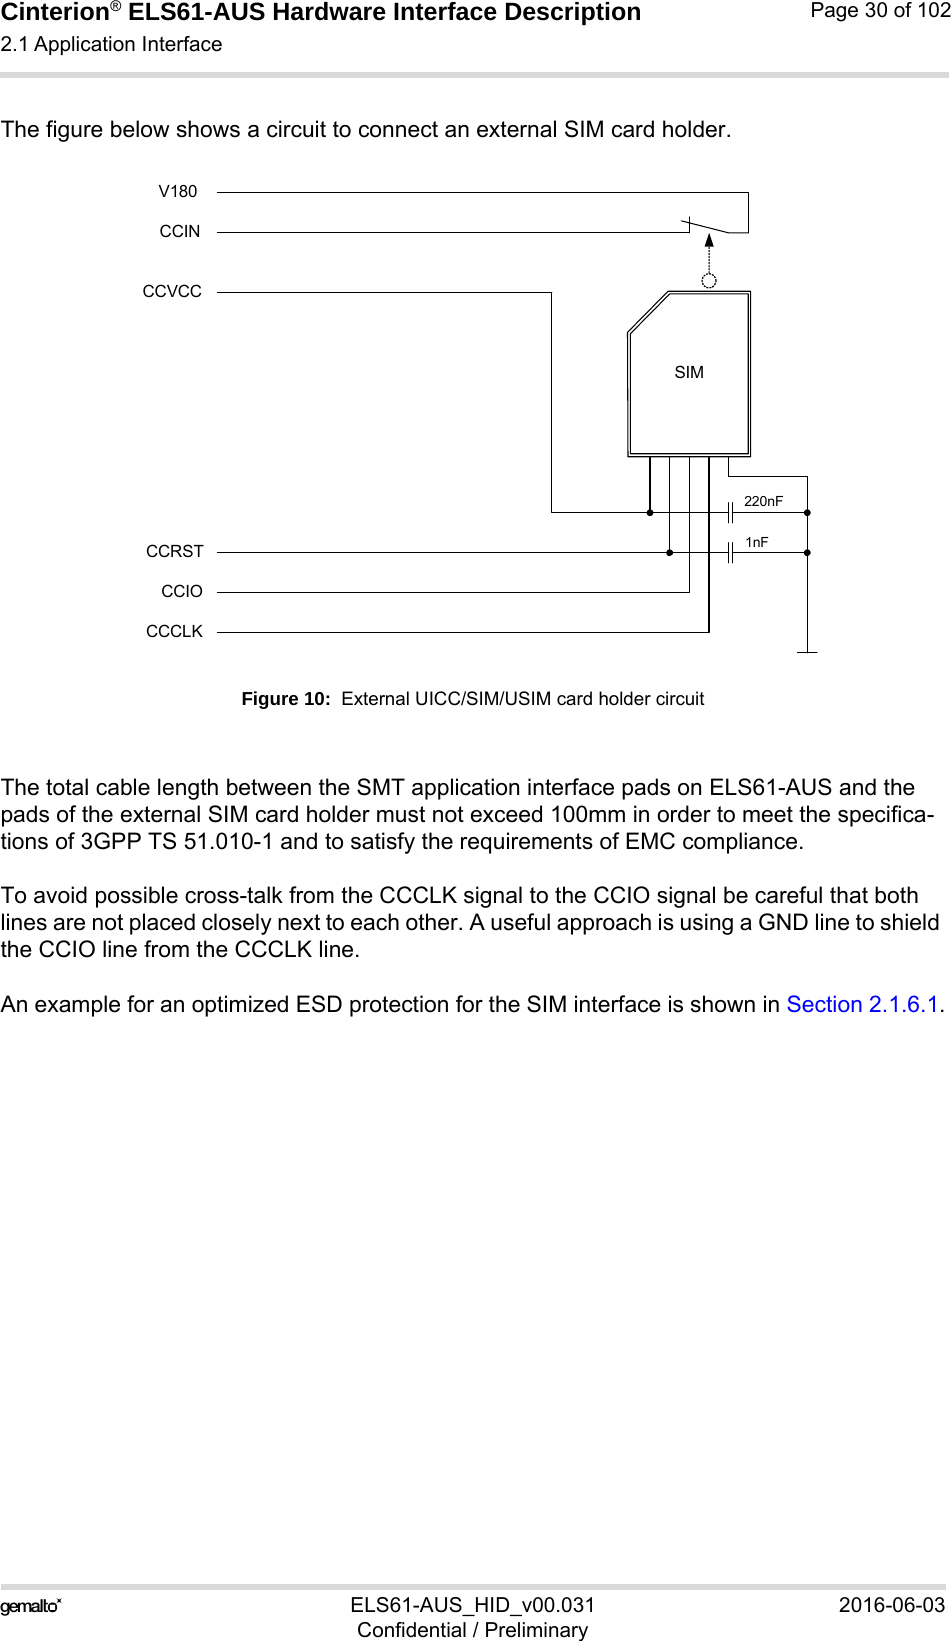 Cinterion® ELS61-AUS Hardware Interface Description2.1 Application Interface52ELS61-AUS_HID_v00.031 2016-06-03Confidential / PreliminaryPage 30 of 102The figure below shows a circuit to connect an external SIM card holder.Figure 10:  External UICC/SIM/USIM card holder circuitThe total cable length between the SMT application interface pads on ELS61-AUS and the pads of the external SIM card holder must not exceed 100mm in order to meet the specifica-tions of 3GPP TS 51.010-1 and to satisfy the requirements of EMC compliance.To avoid possible cross-talk from the CCCLK signal to the CCIO signal be careful that both lines are not placed closely next to each other. A useful approach is using a GND line to shield the CCIO line from the CCCLK line.An example for an optimized ESD protection for the SIM interface is shown in Section 2.1.6.1.SIMCCVCCCCRSTCCIOCCCLK220nF1nFCCINV180